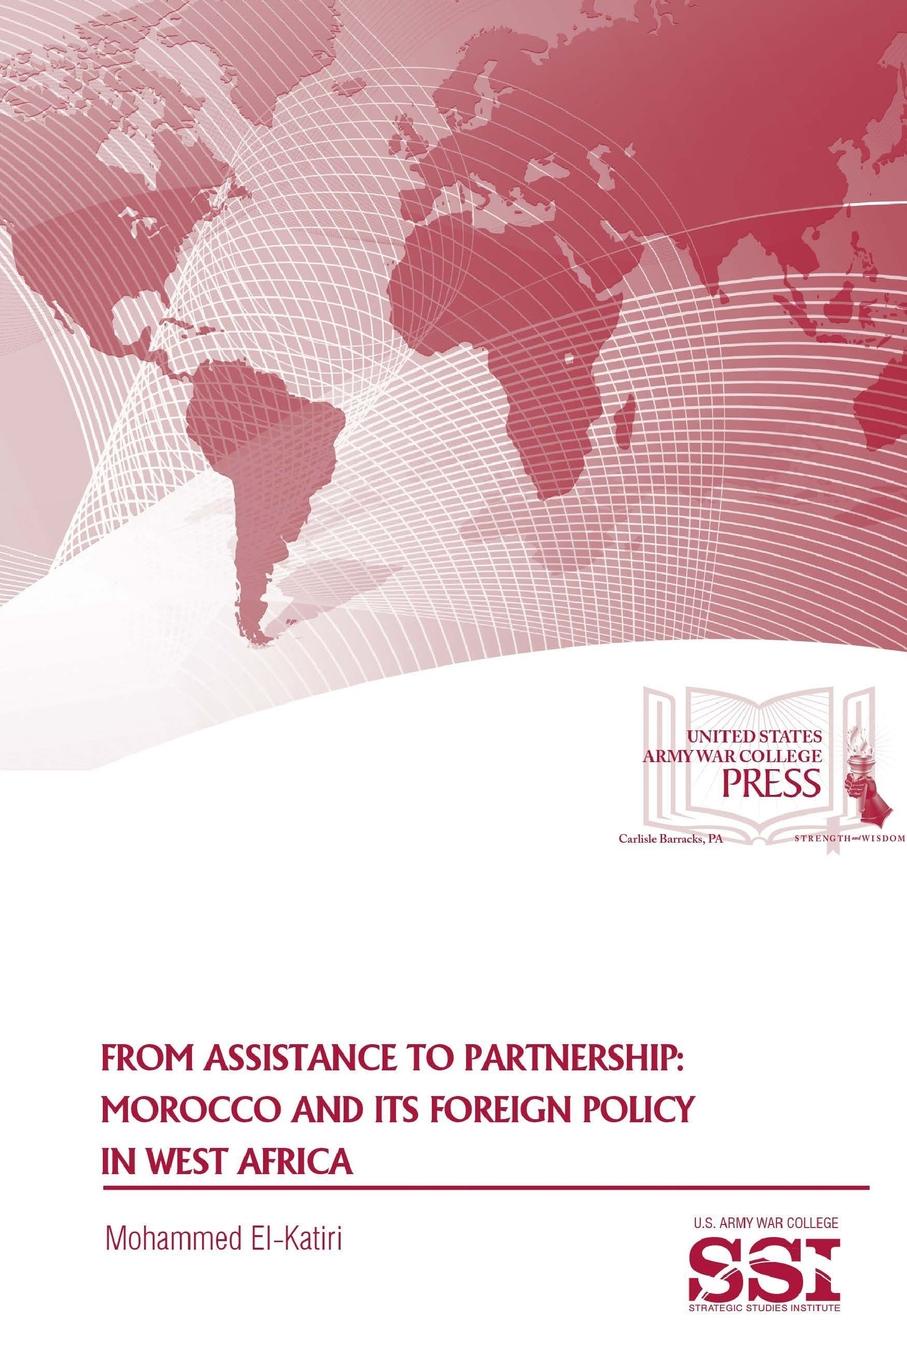 From Assistance To Partnership. Morocco and Its Foreign Policy in West Africa